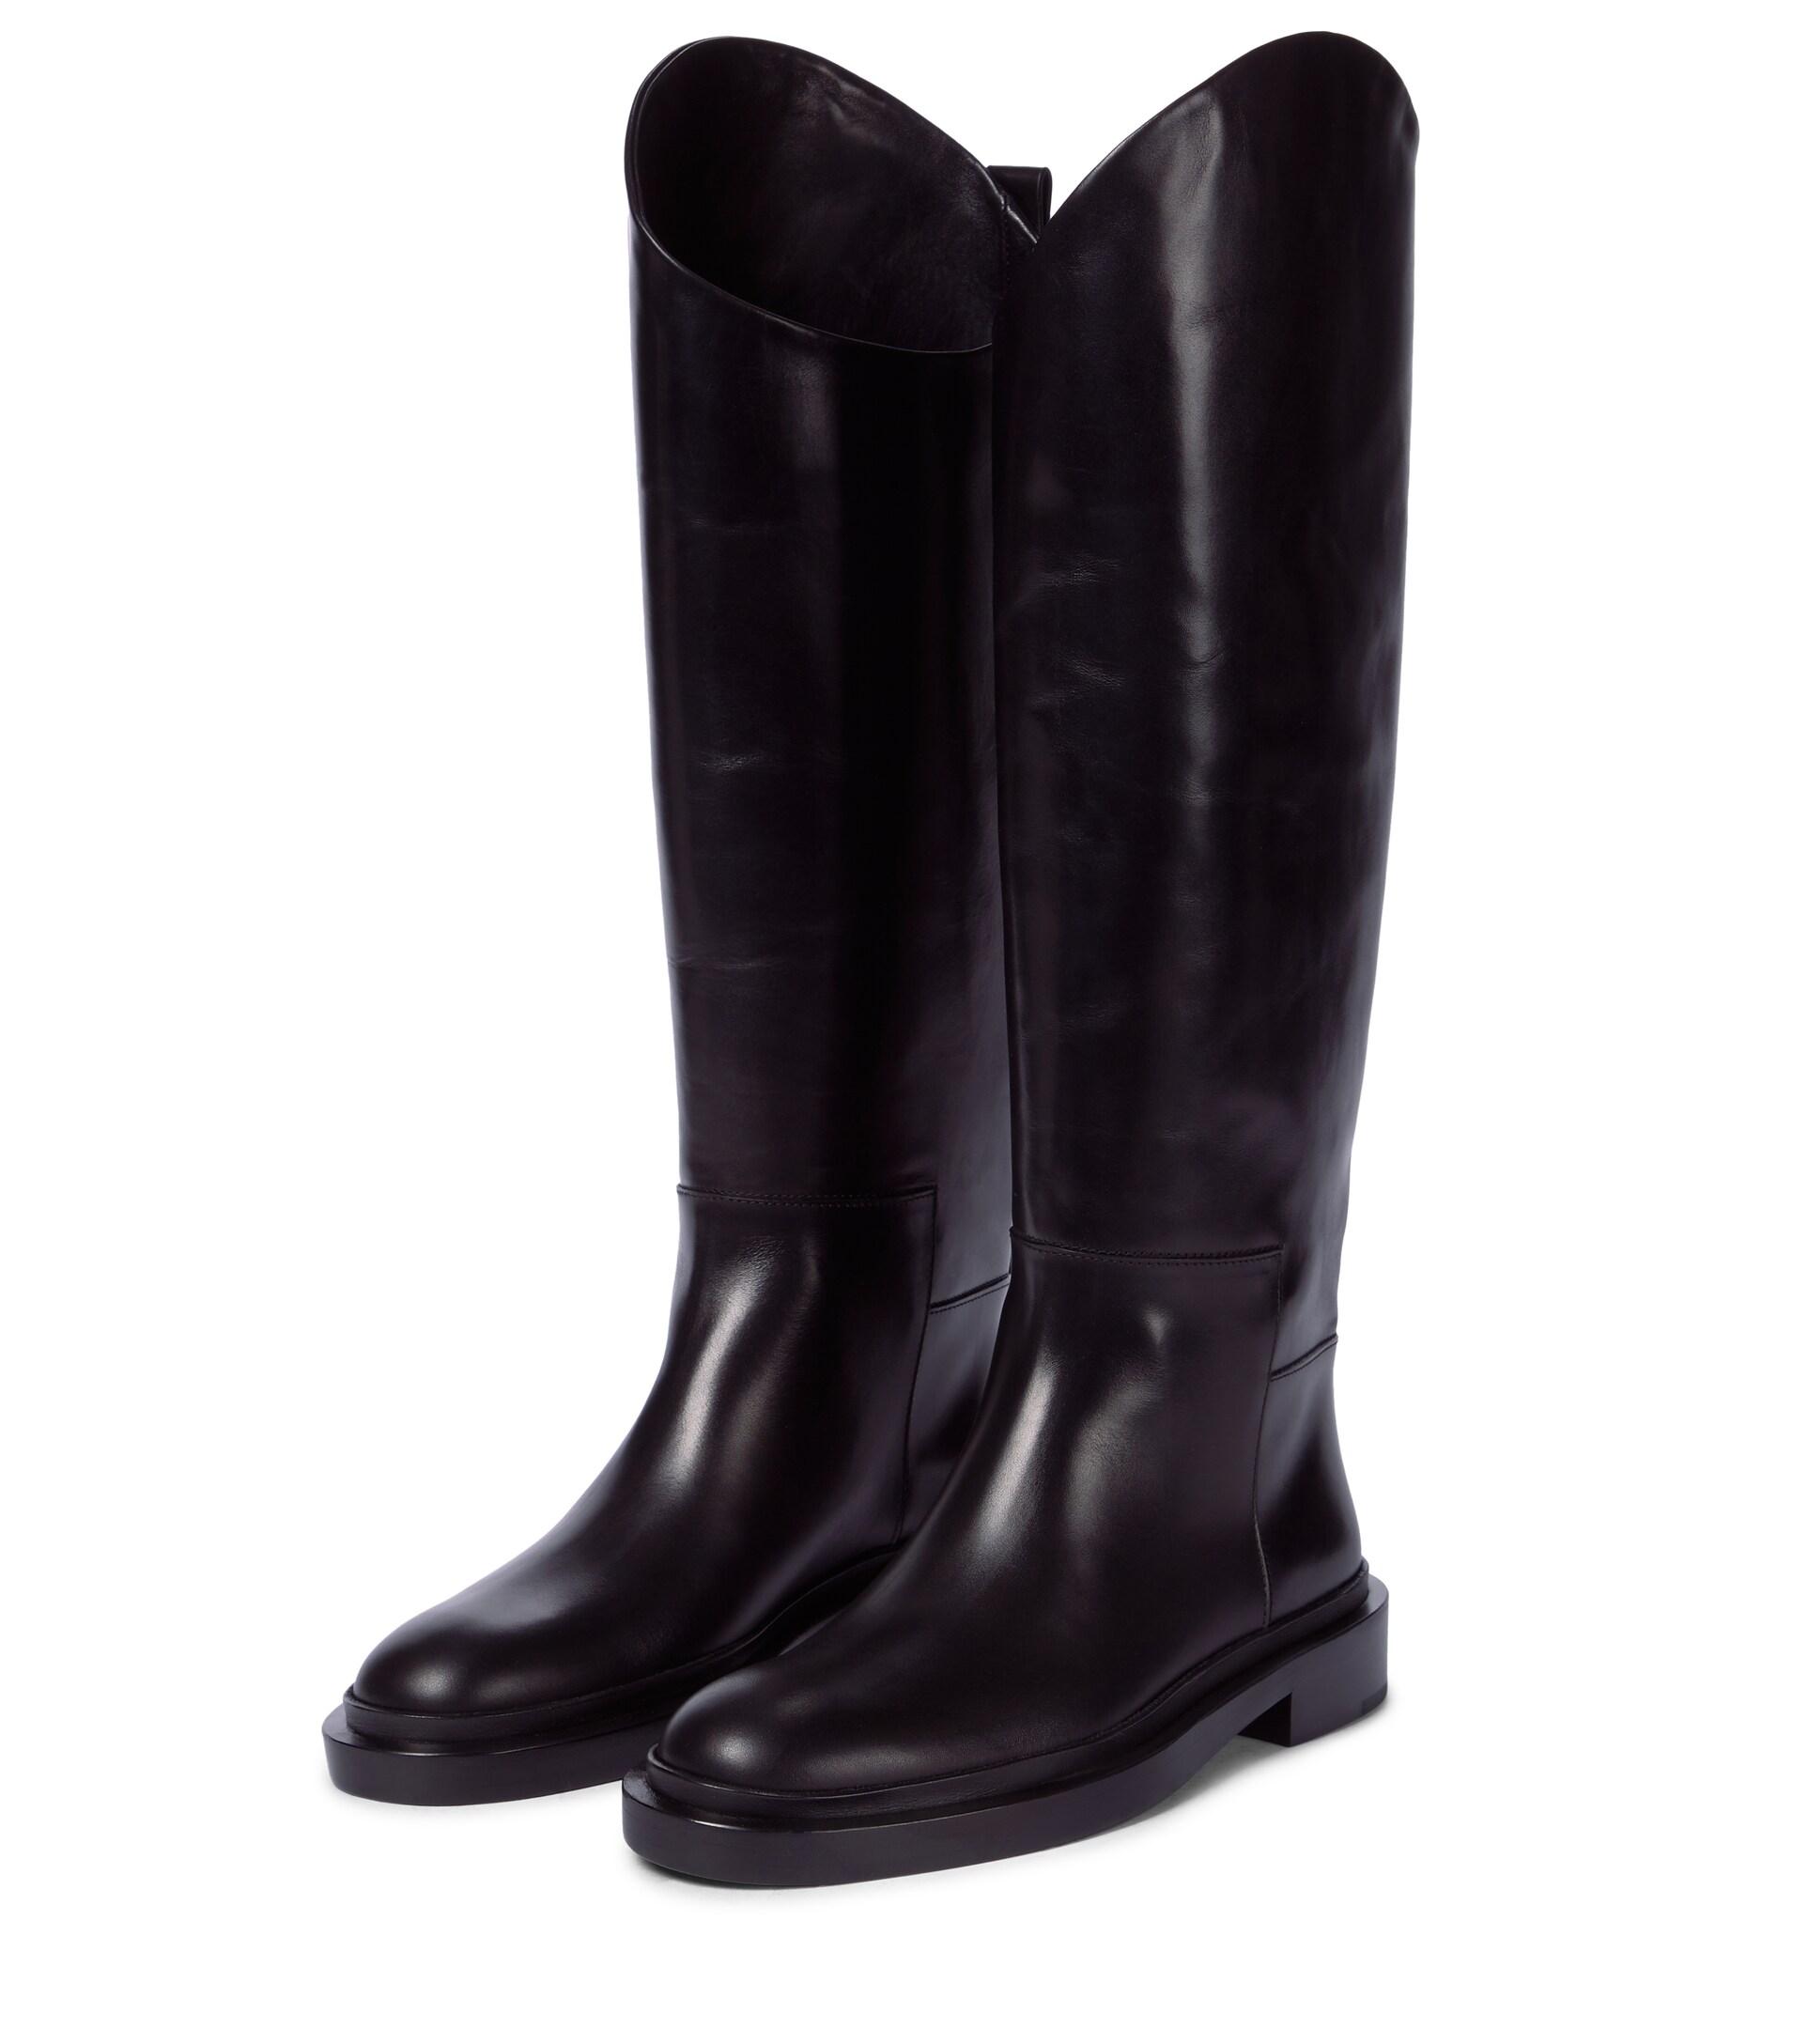 Coach Black Leather Riding Boots Online Buying, Save 57% | jlcatj.gob.mx